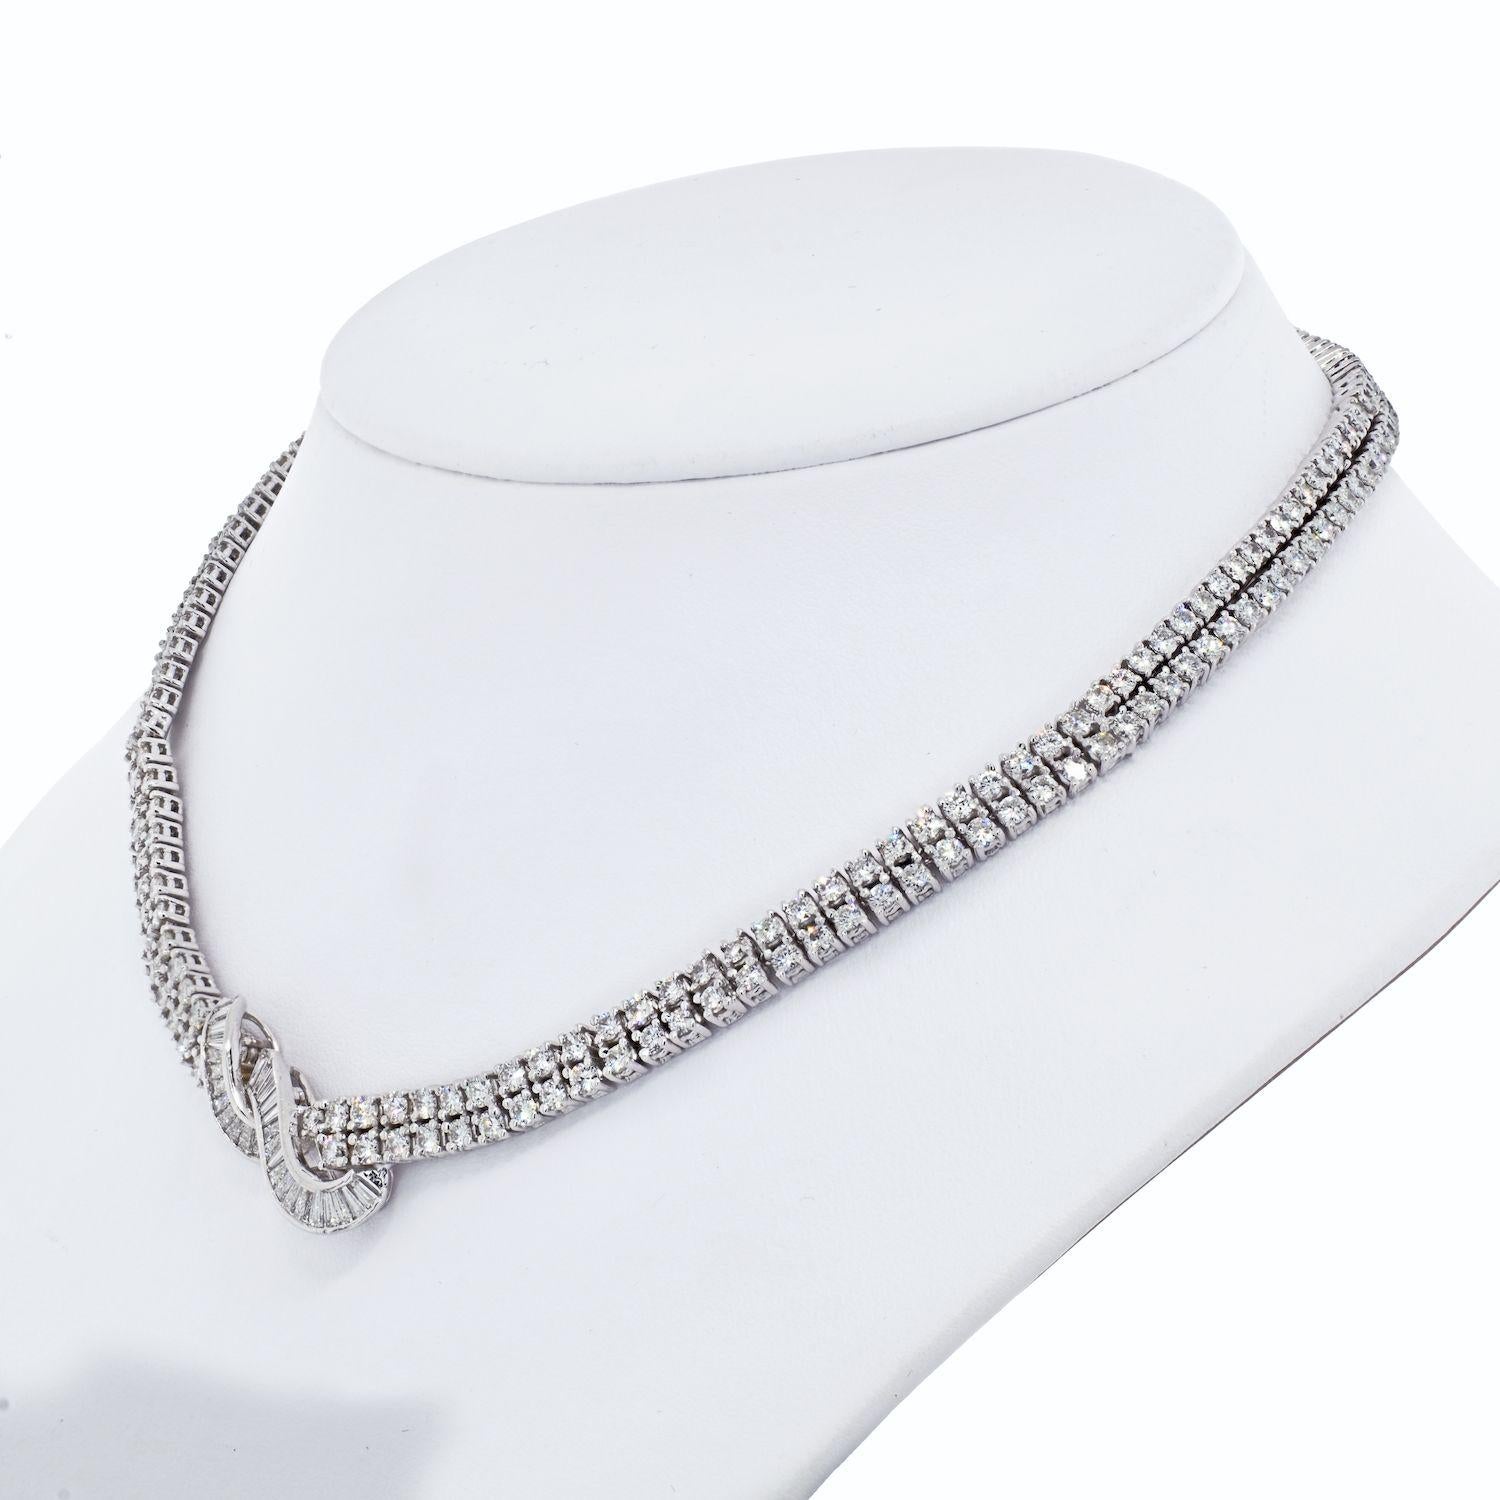 18K White Gold 20 Carat Round Cut Diamond Estate Tennis Riviera mounted with over 200 round diamonds and over 40 tappered baguettes. 

Diamond quality: G-H color, SI1-SI2 clarity. 

The necklace is comprised of two rows of round cut diamonds mounted